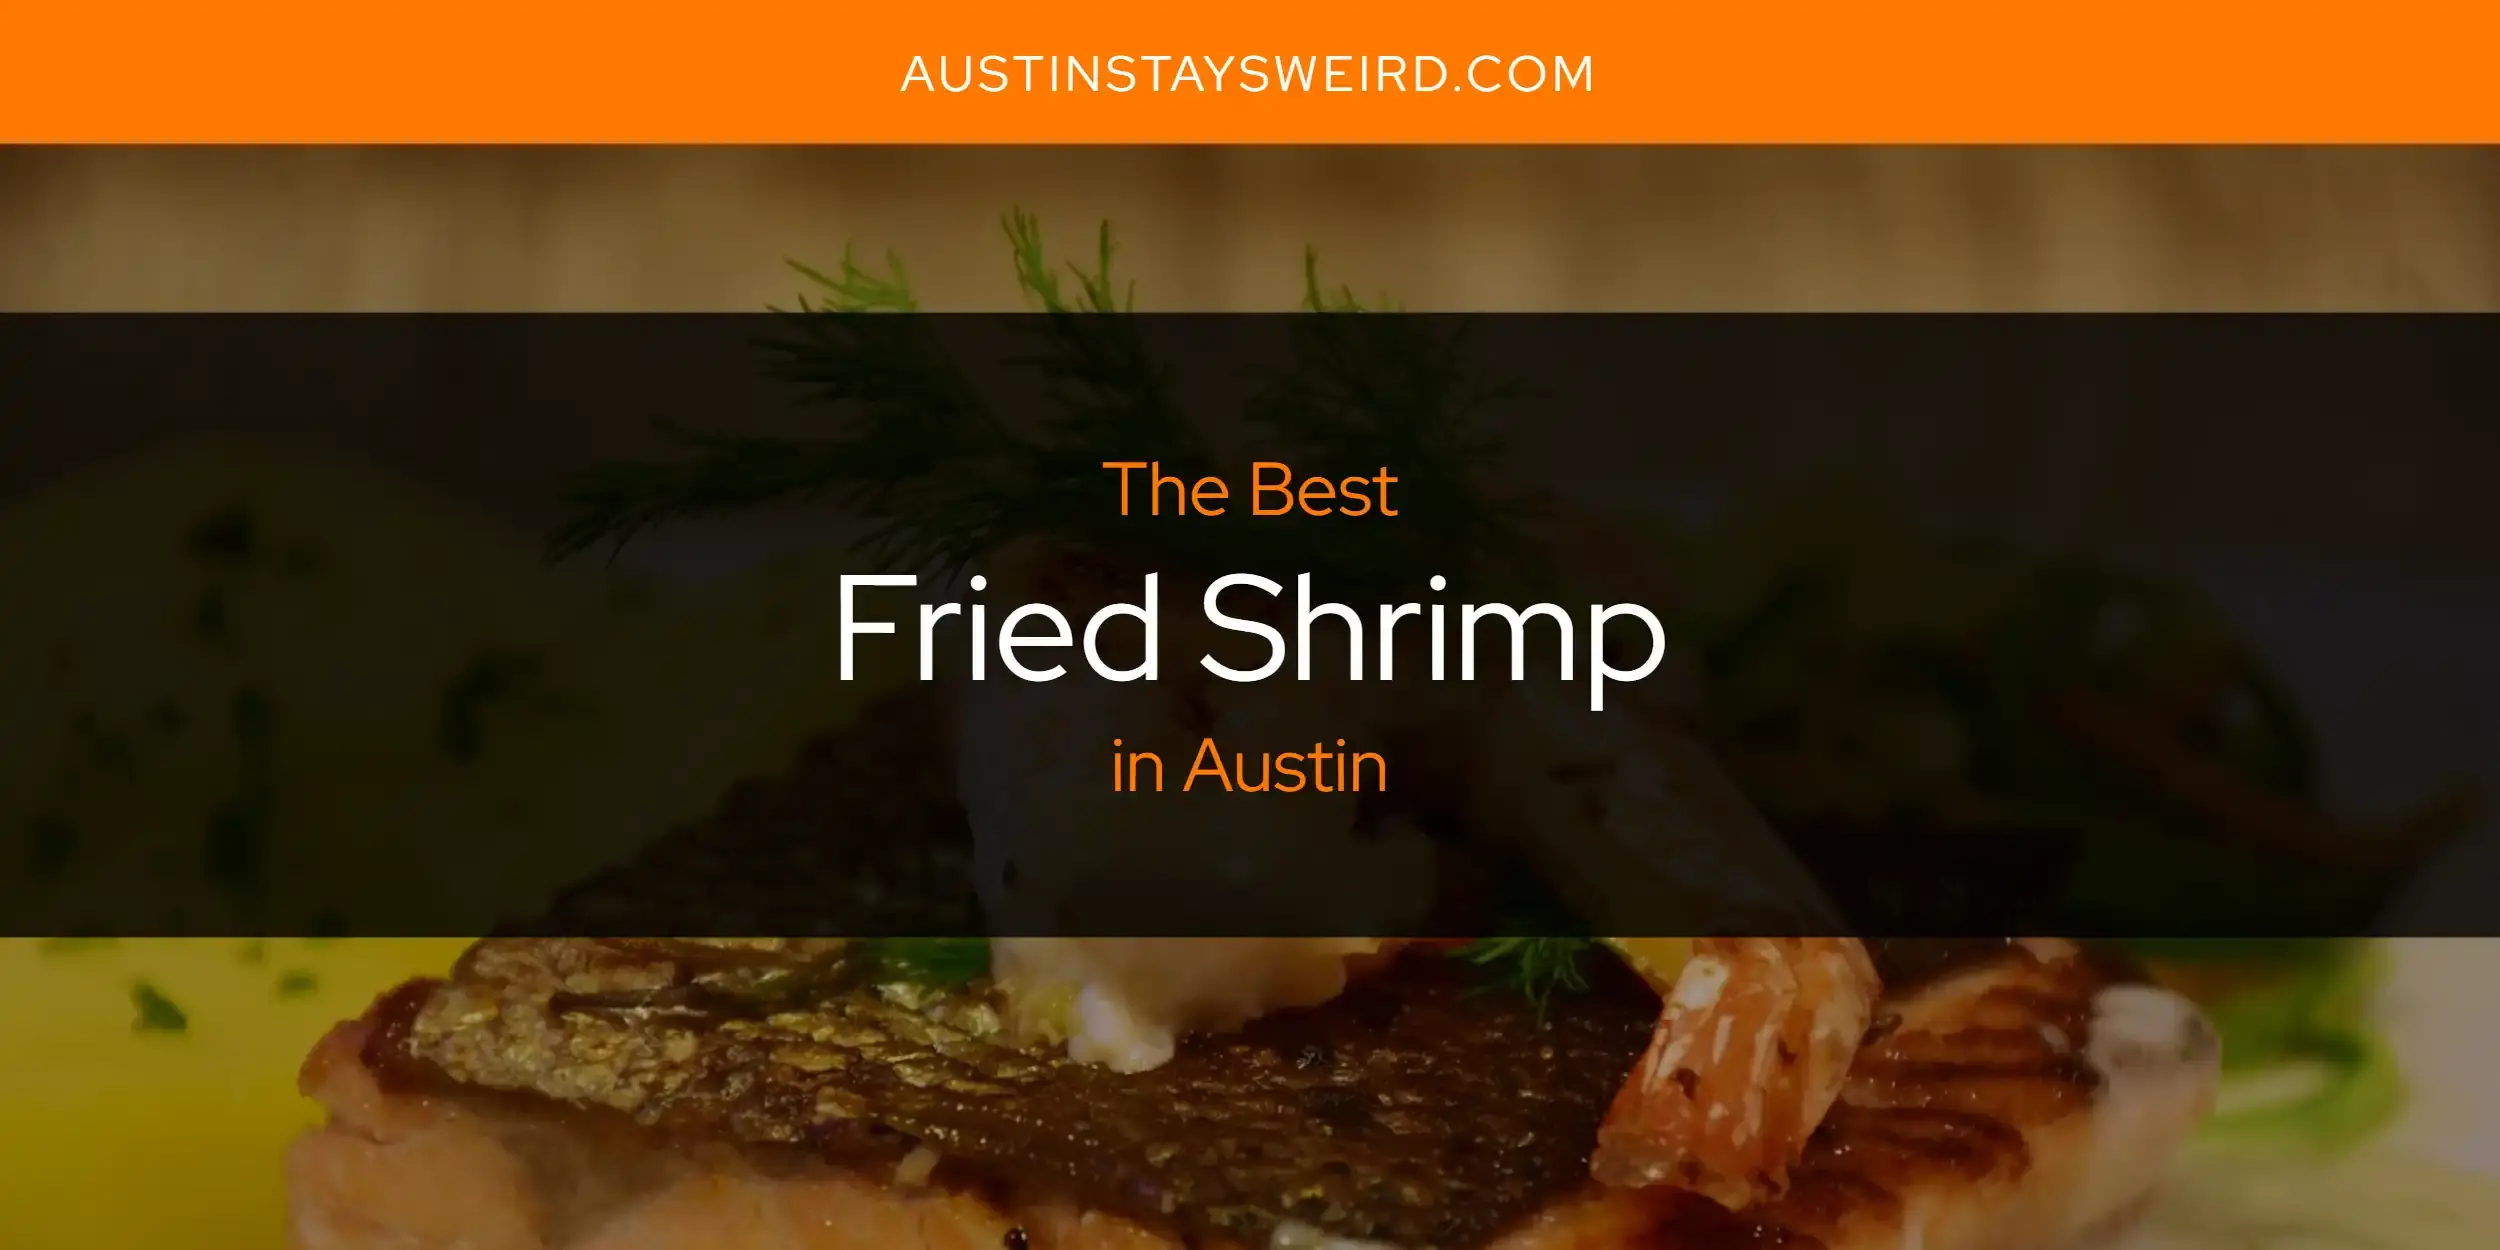 Best Fried Shrimp in Austin? Here's the Top 8